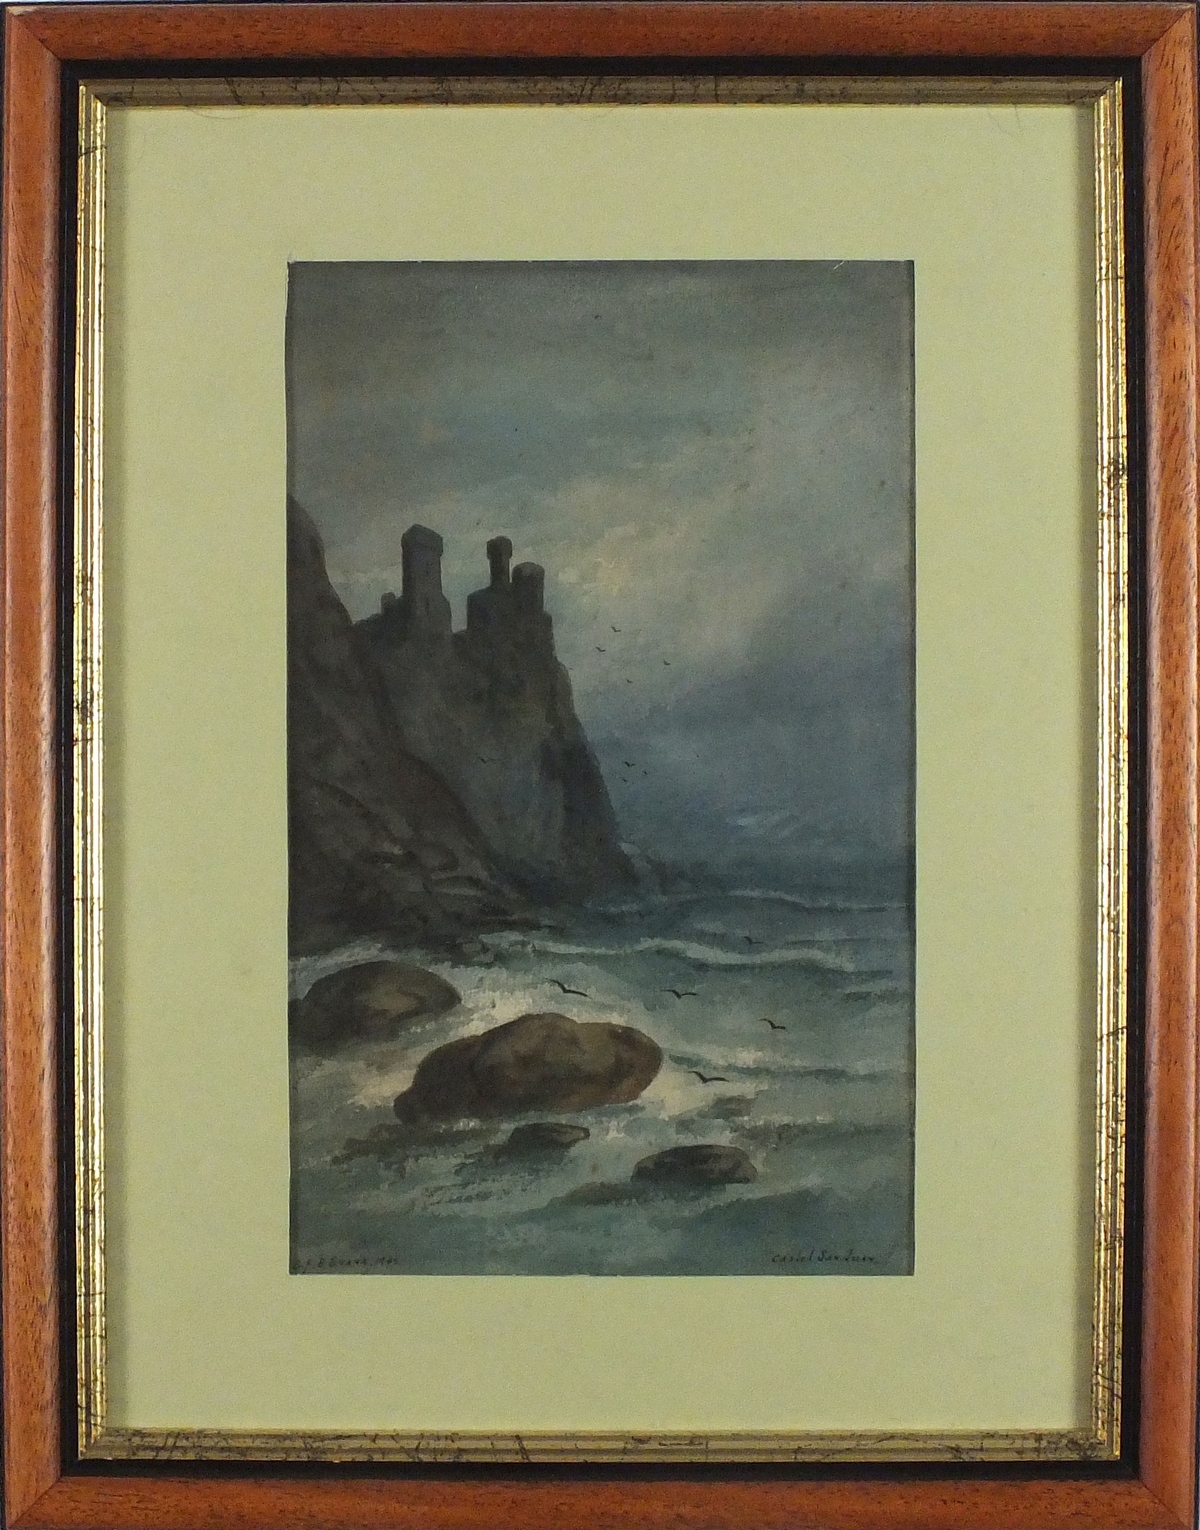 E* J* B* EVANS (Active 1900-1920), Watercolour, 'Castel San Juan' - stone fortress viewed from - Image 2 of 2